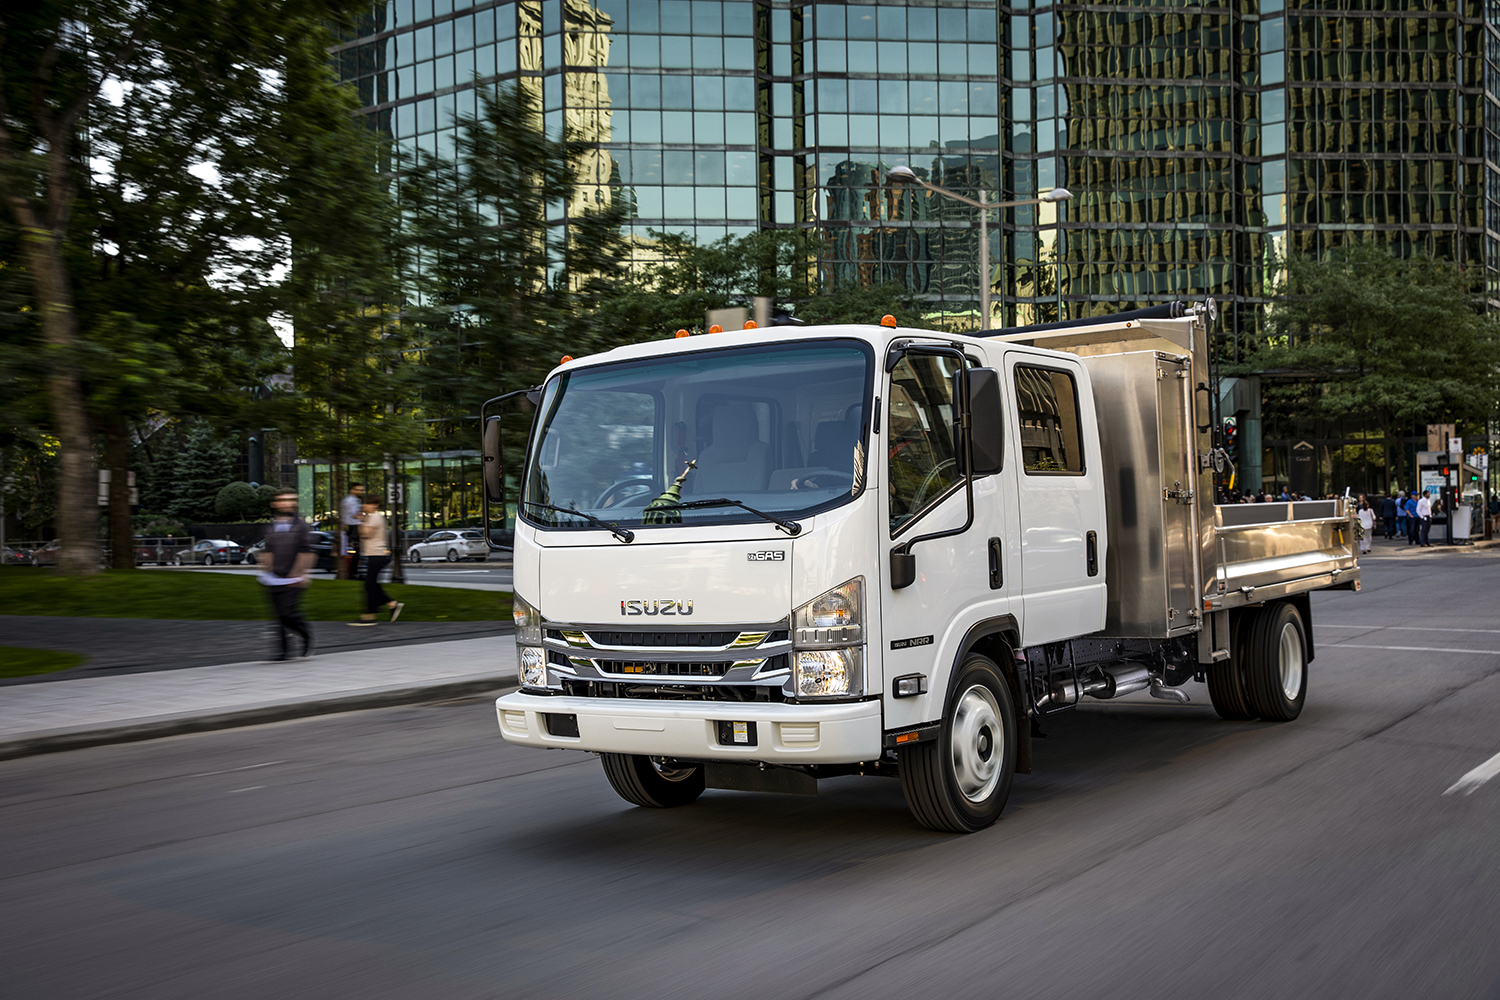 ISUZU NRR Class 5 Truck Is A Great Commercial Vehicle